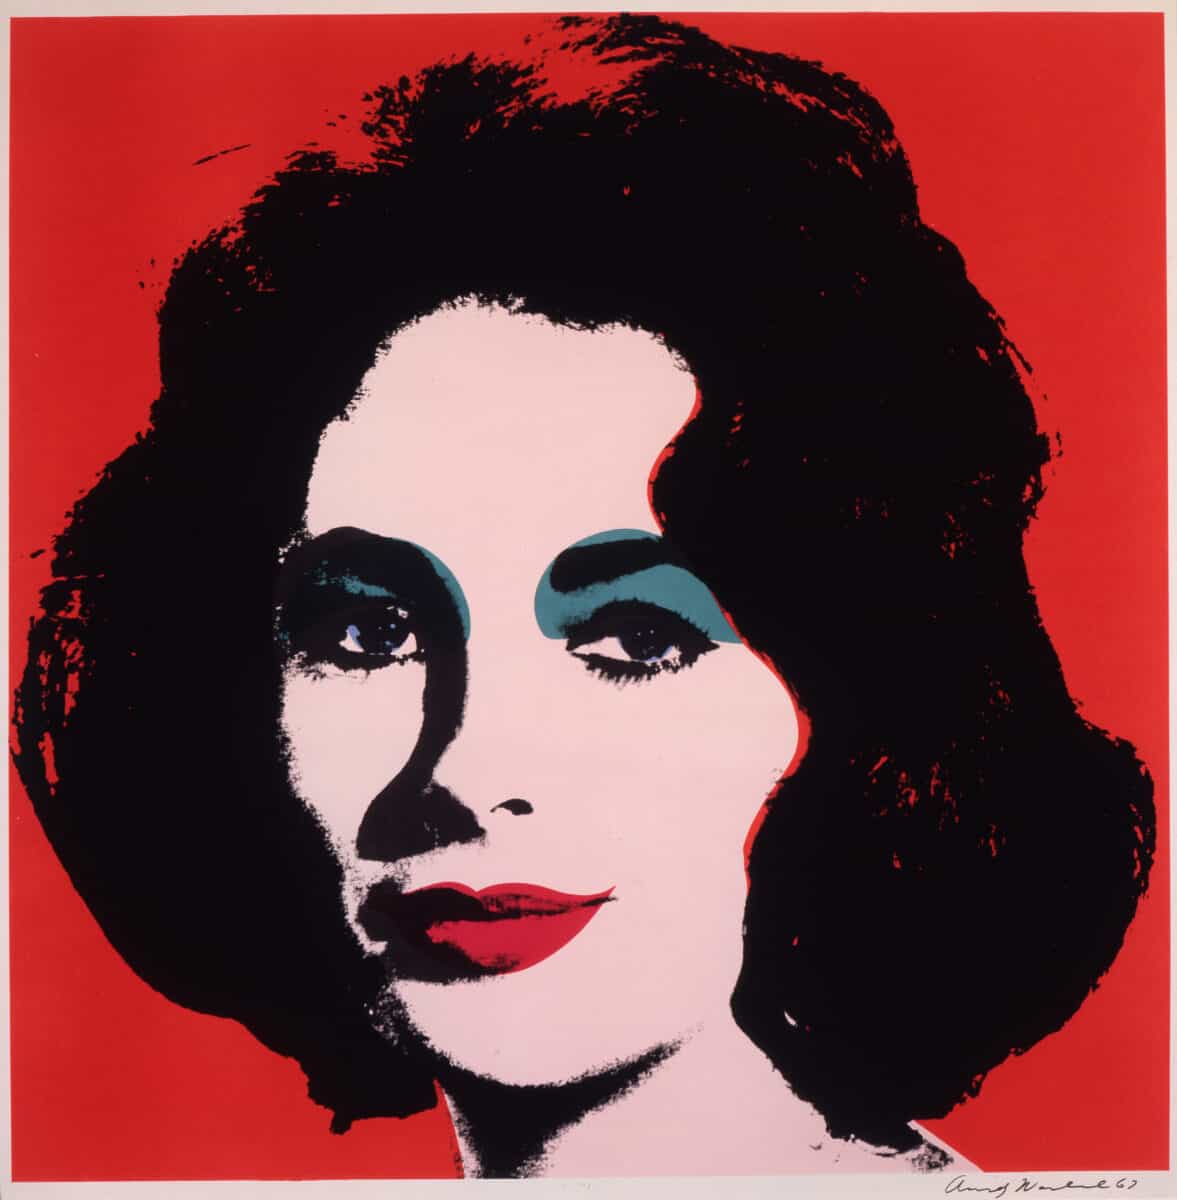 Liz, 1964 Offset lithograph on paper 23 1/8 x 23 1/8 in. (58.7 x 58.7 cm.) The Andy Warhol Museum, Pittsburgh; Founding Collection, Contribution The Andy Warhol Foundation for the Visual Arts, Inc. 1998.1.2374 © The Andy Warhol Foundation for the Visual Arts, Inc